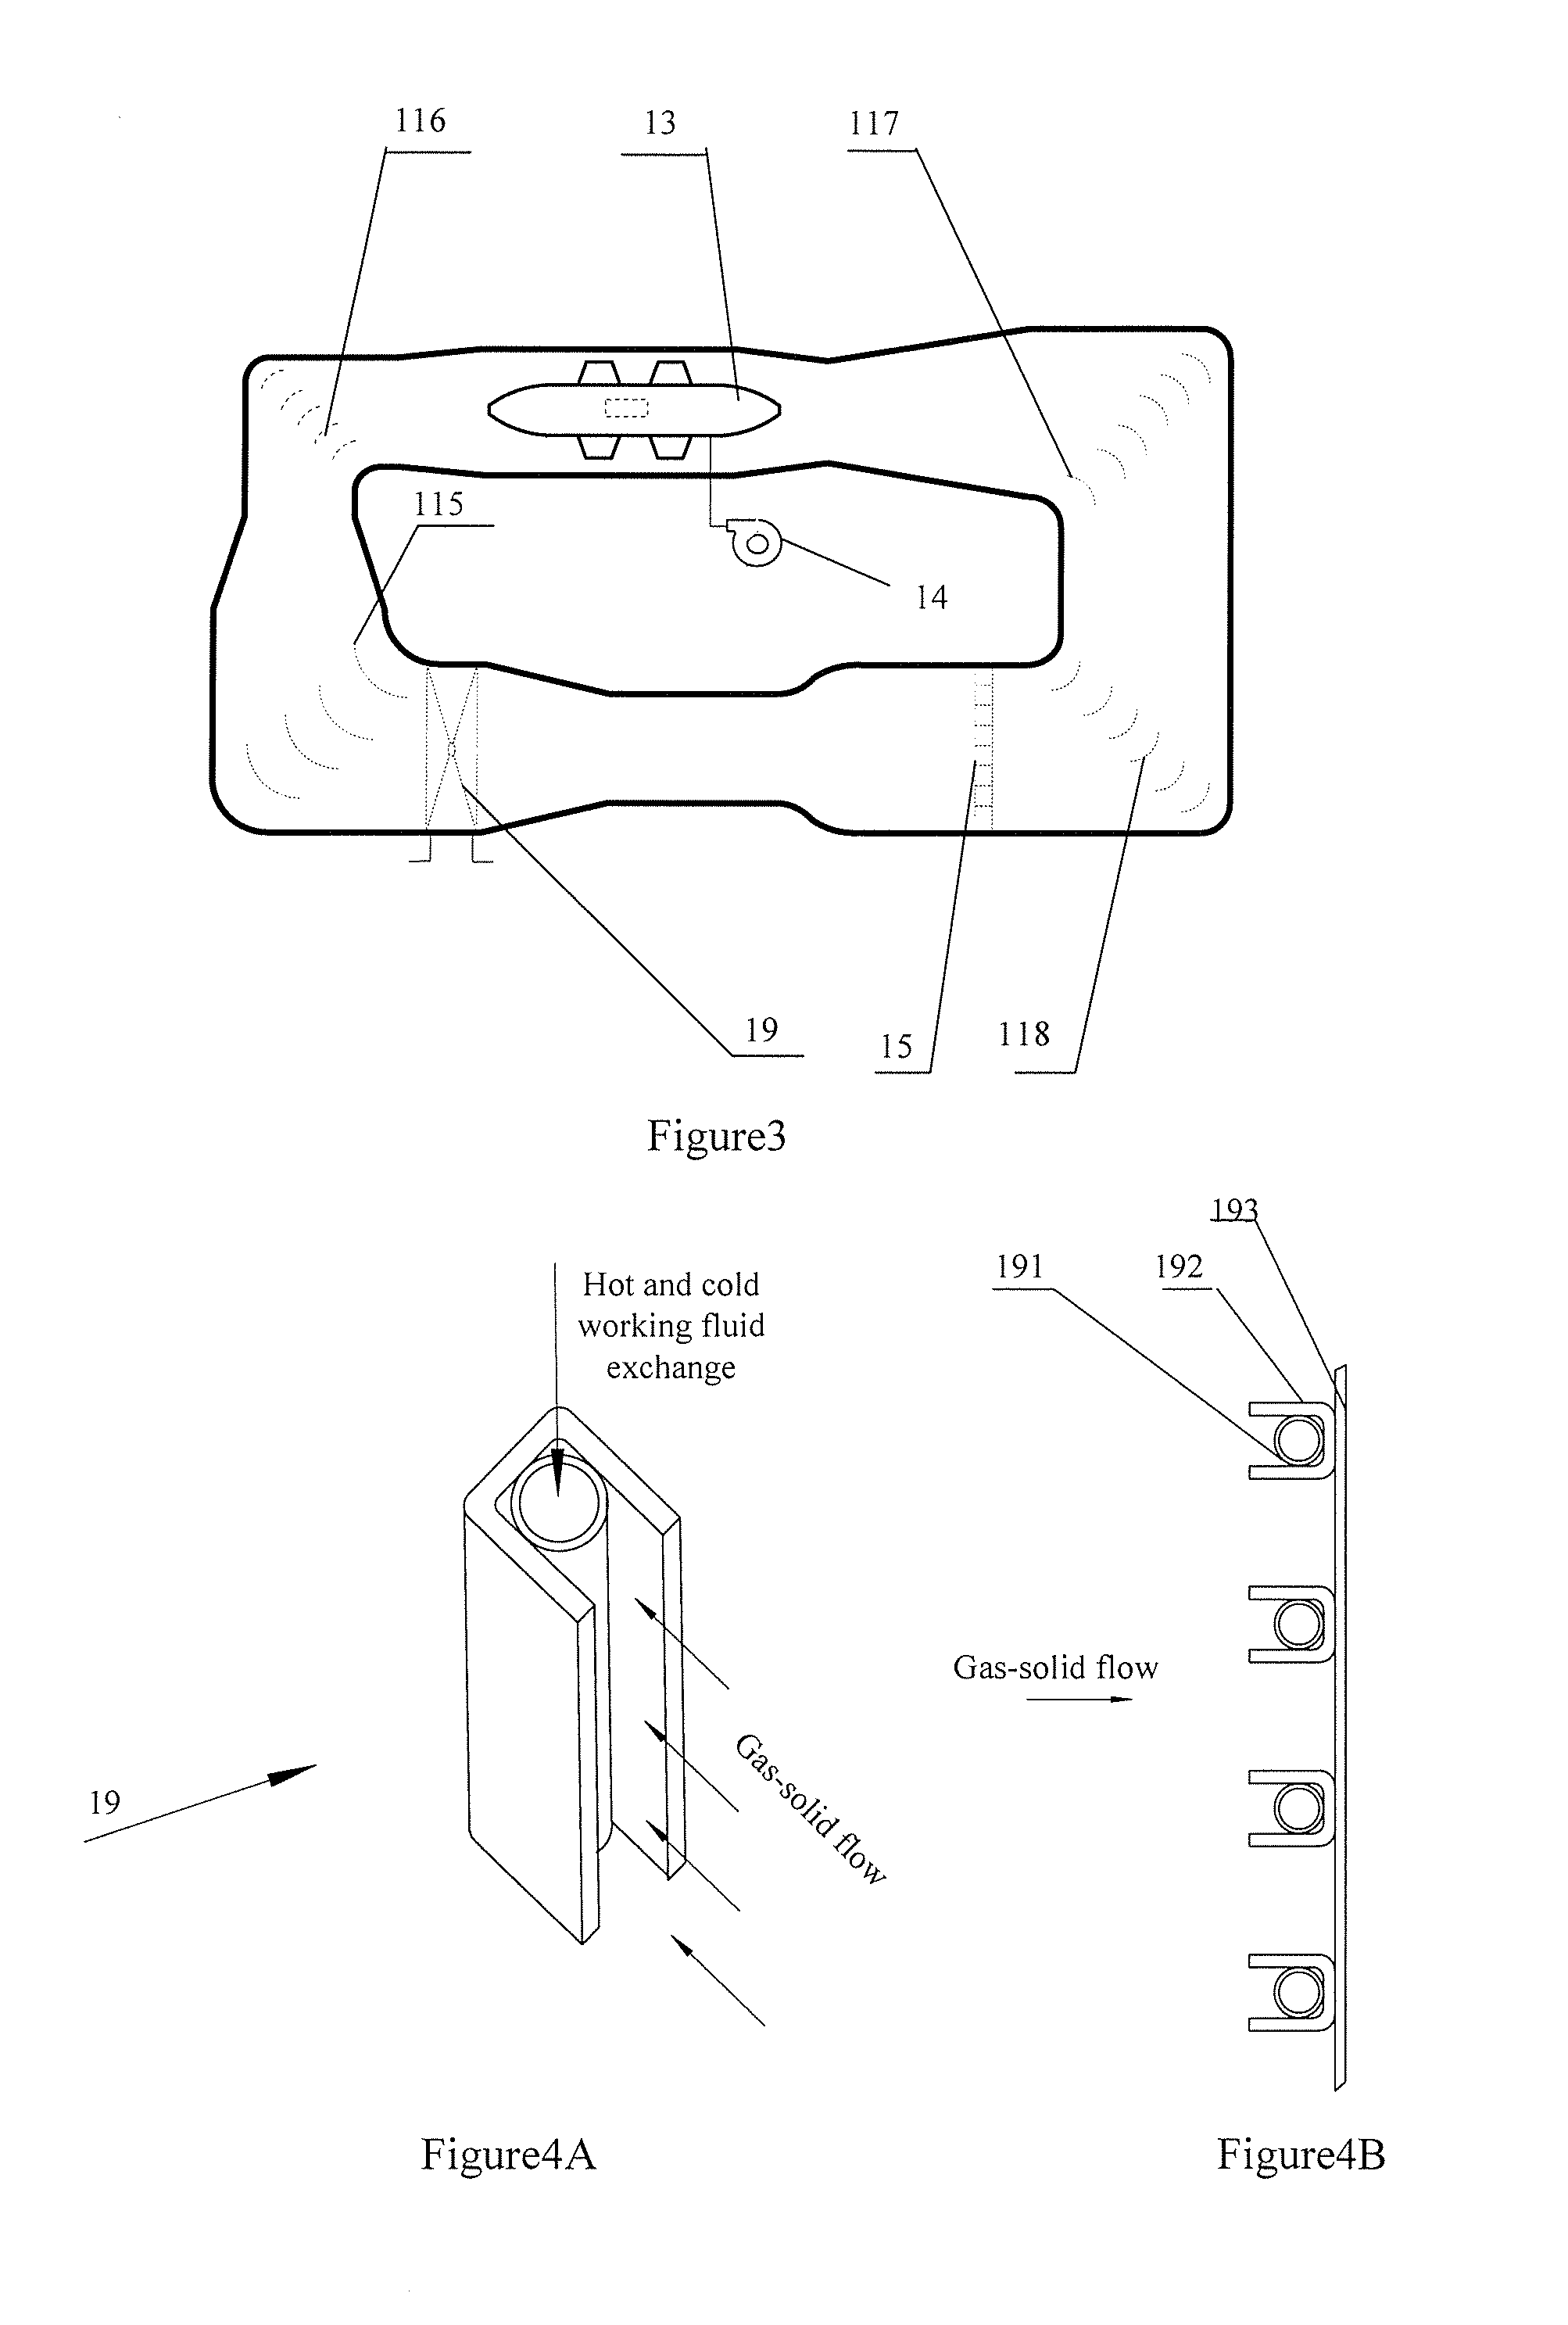 Temperature adjusting device and an intelligent temperature control method for a sand and dust environment testing system